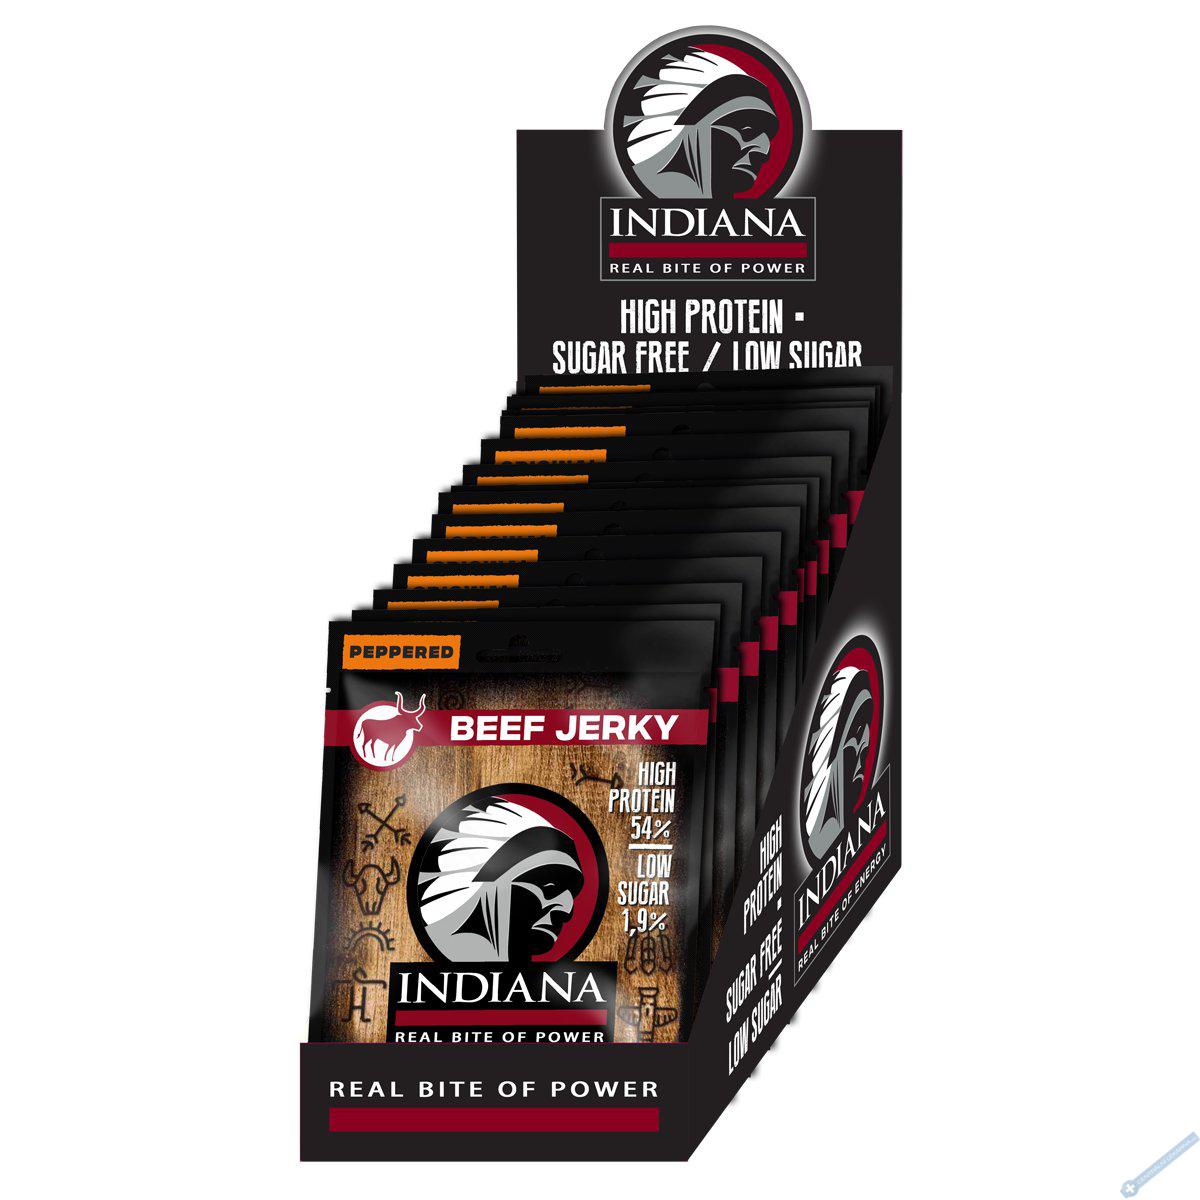 INDIANA Jerky hovz Peppered 375g - display